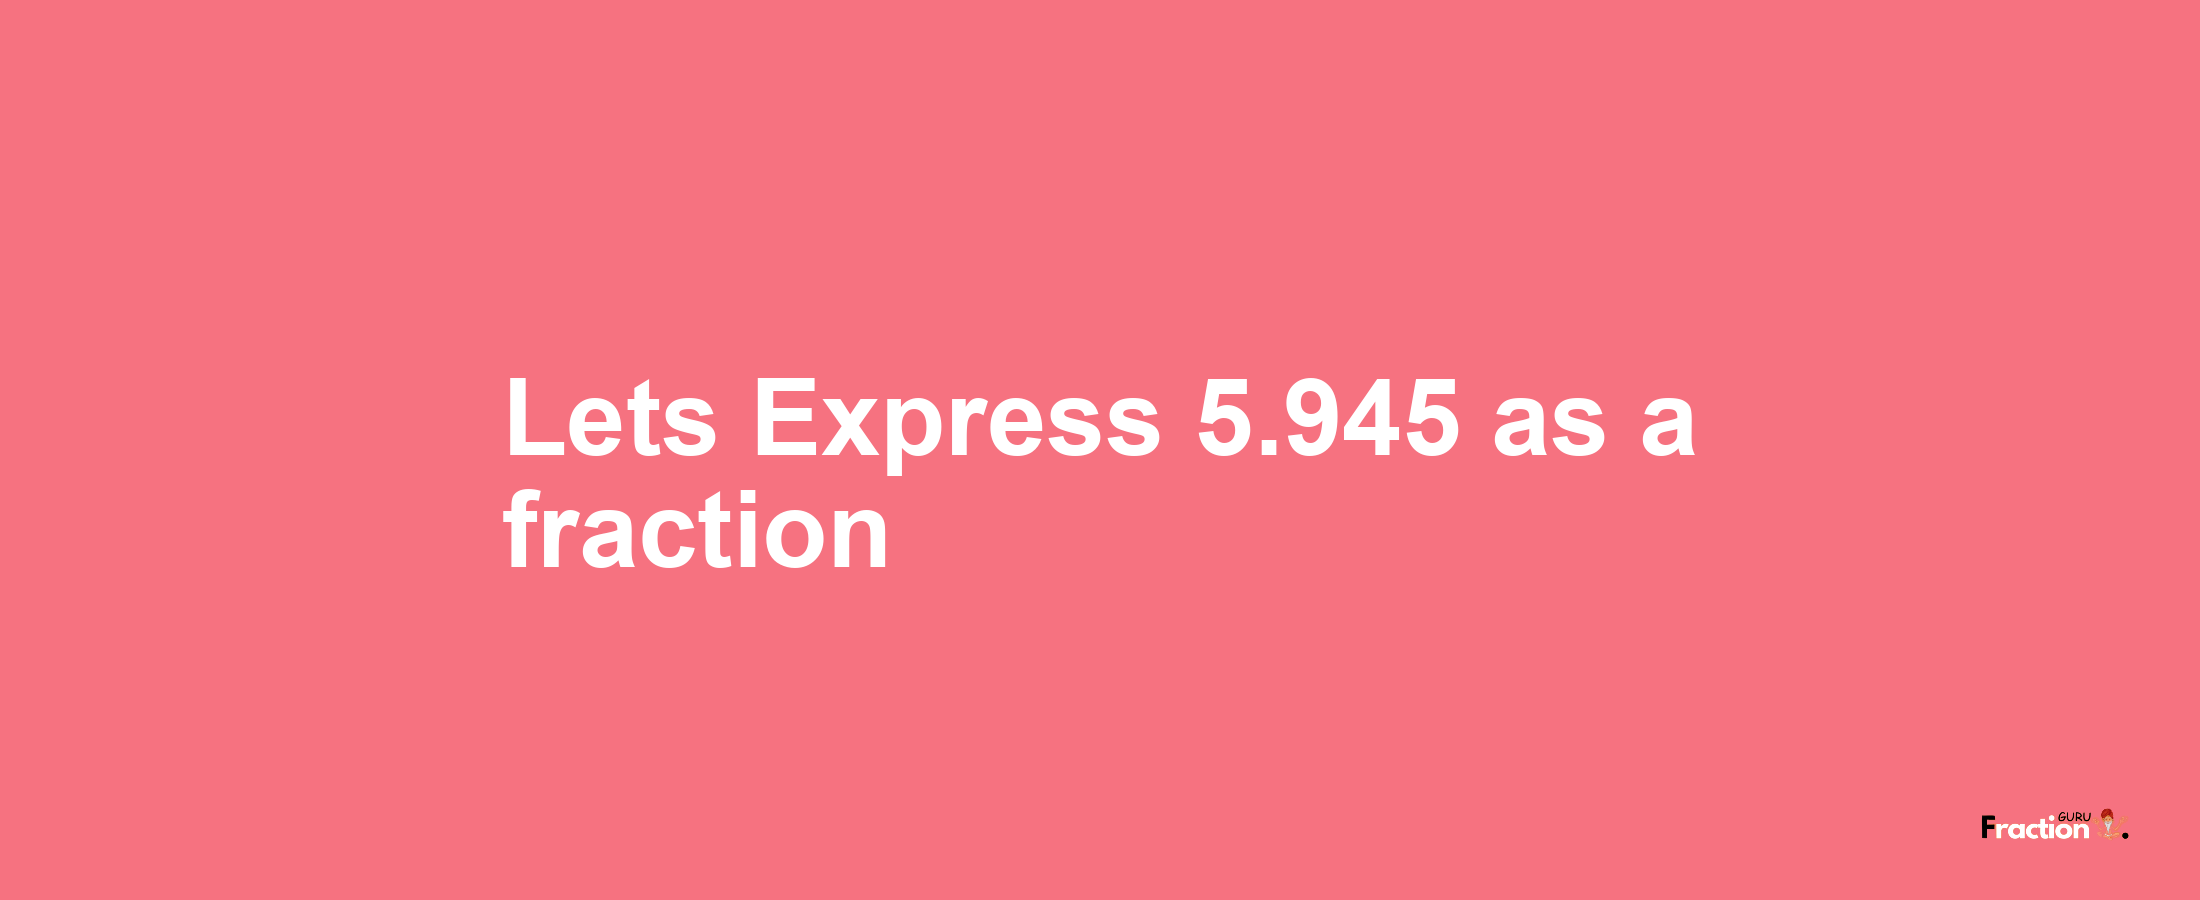 Lets Express 5.945 as afraction